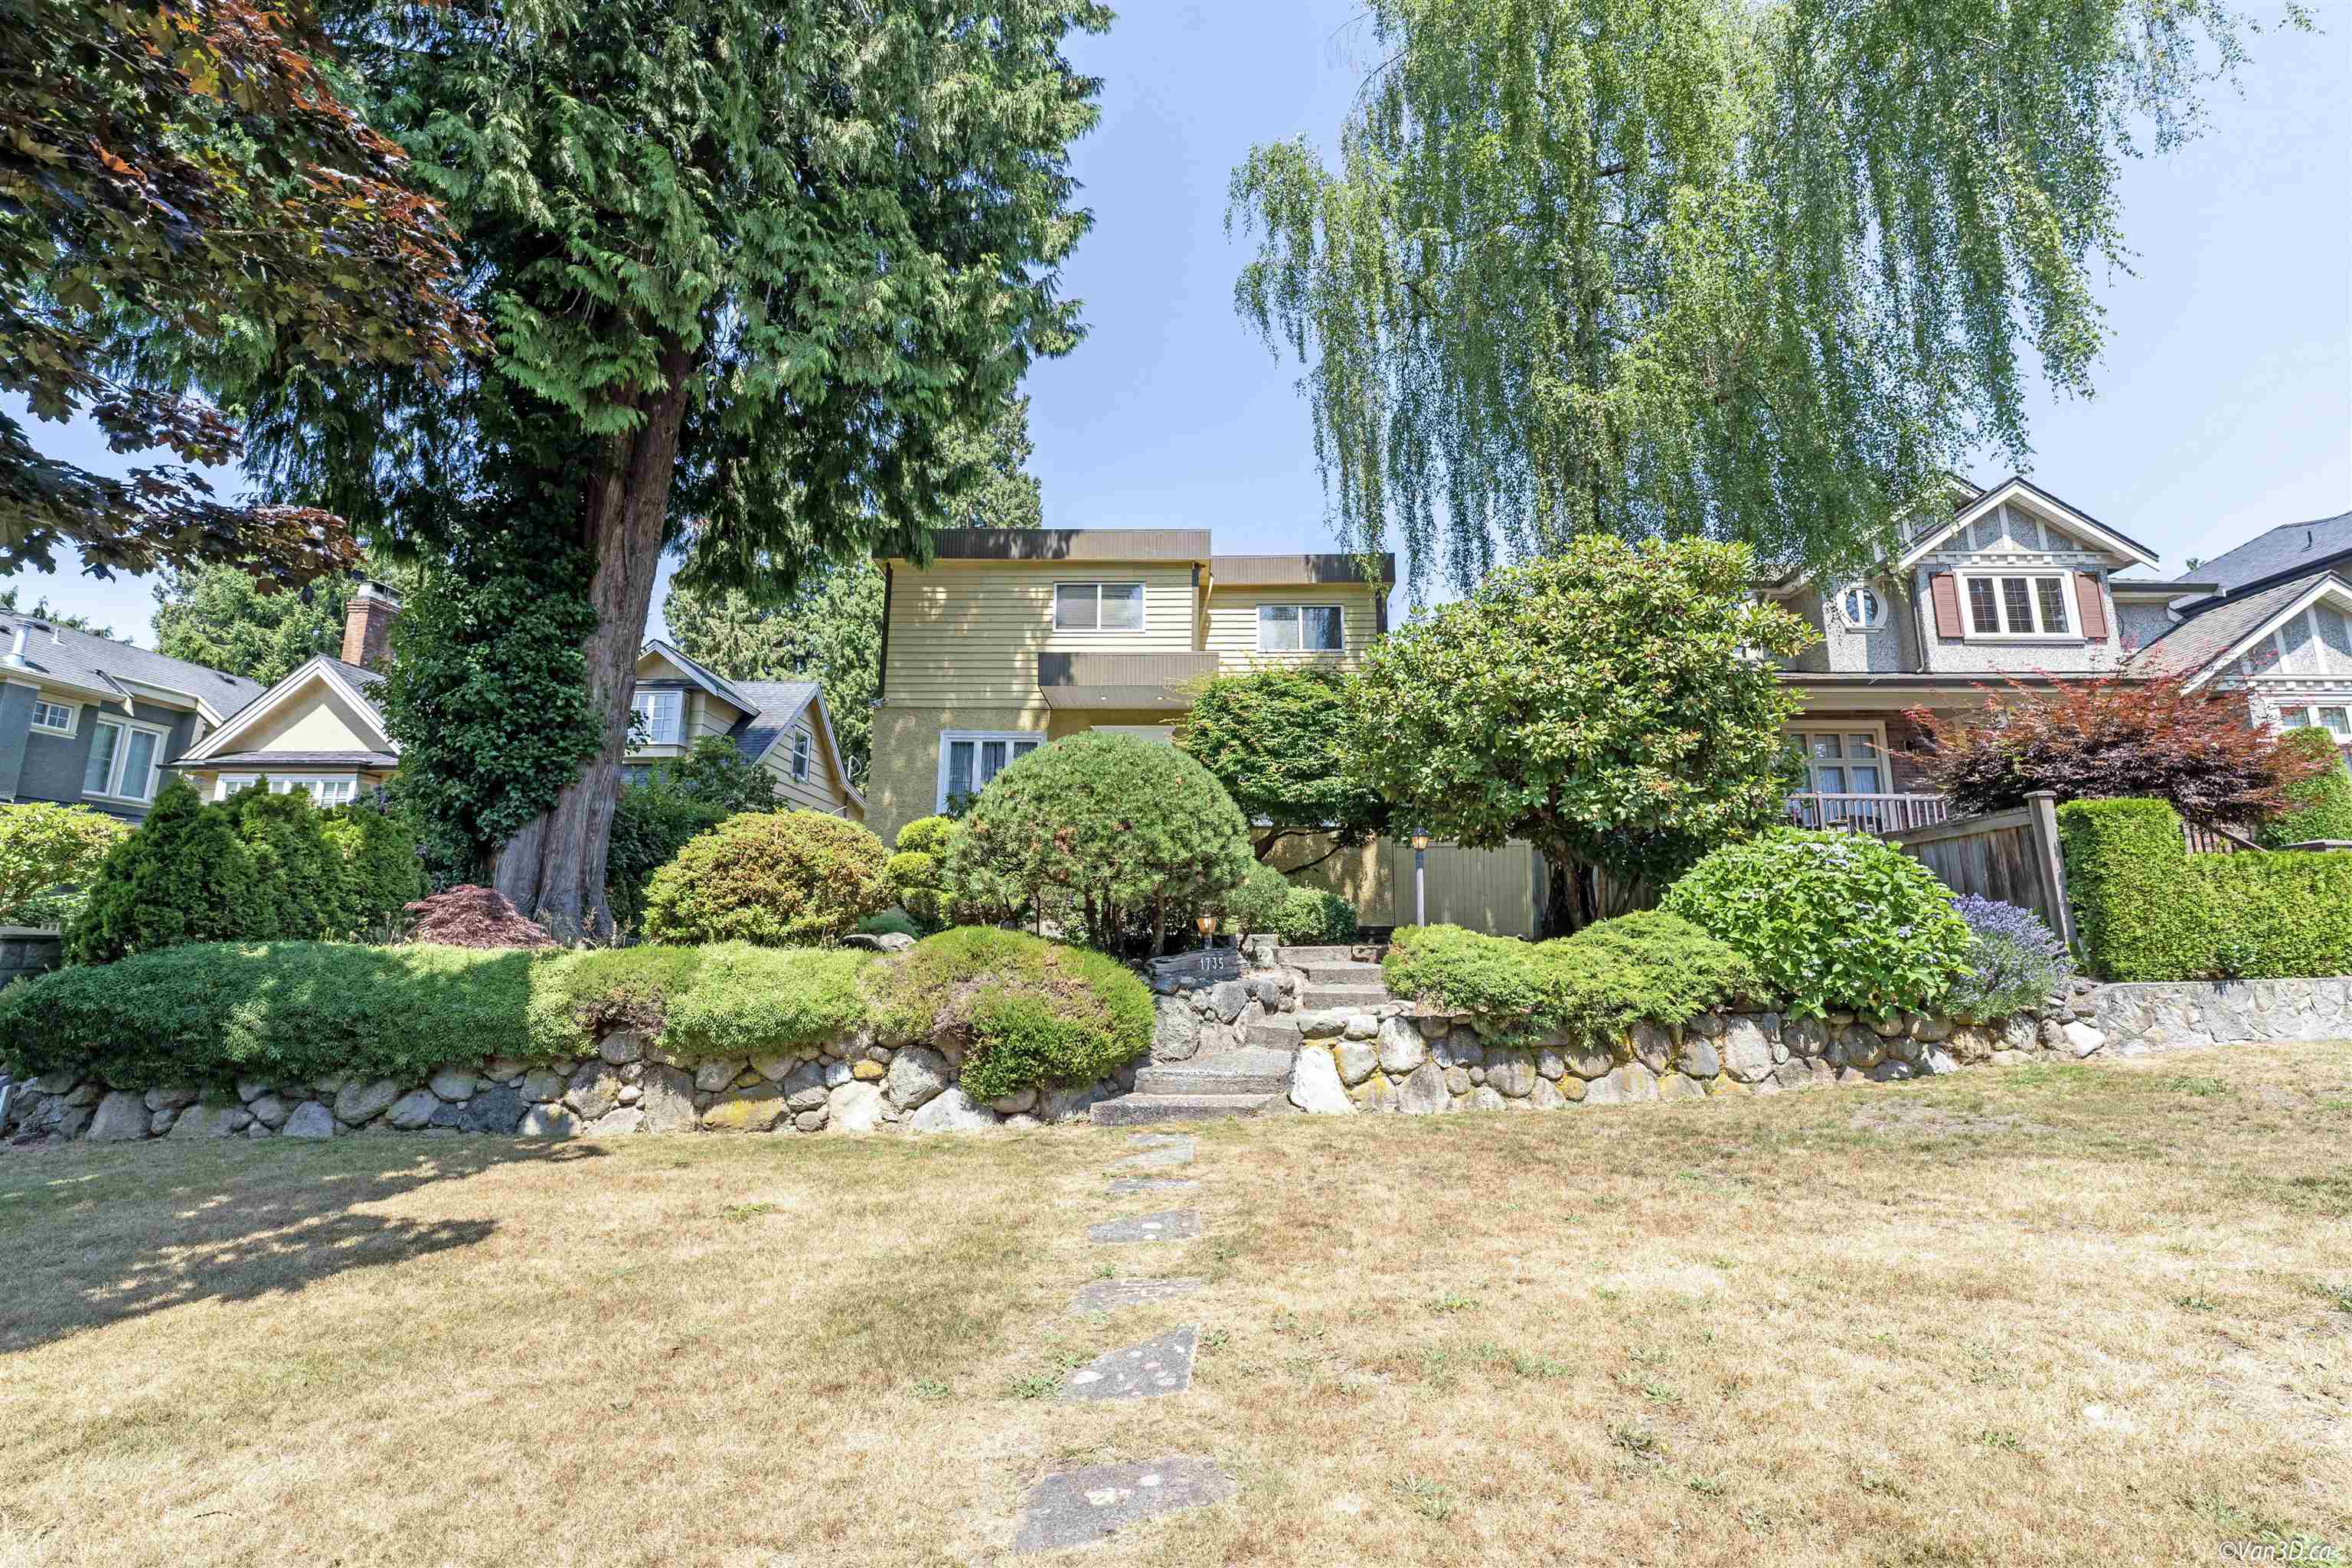 Listing image of 1735 W 62ND AVENUE